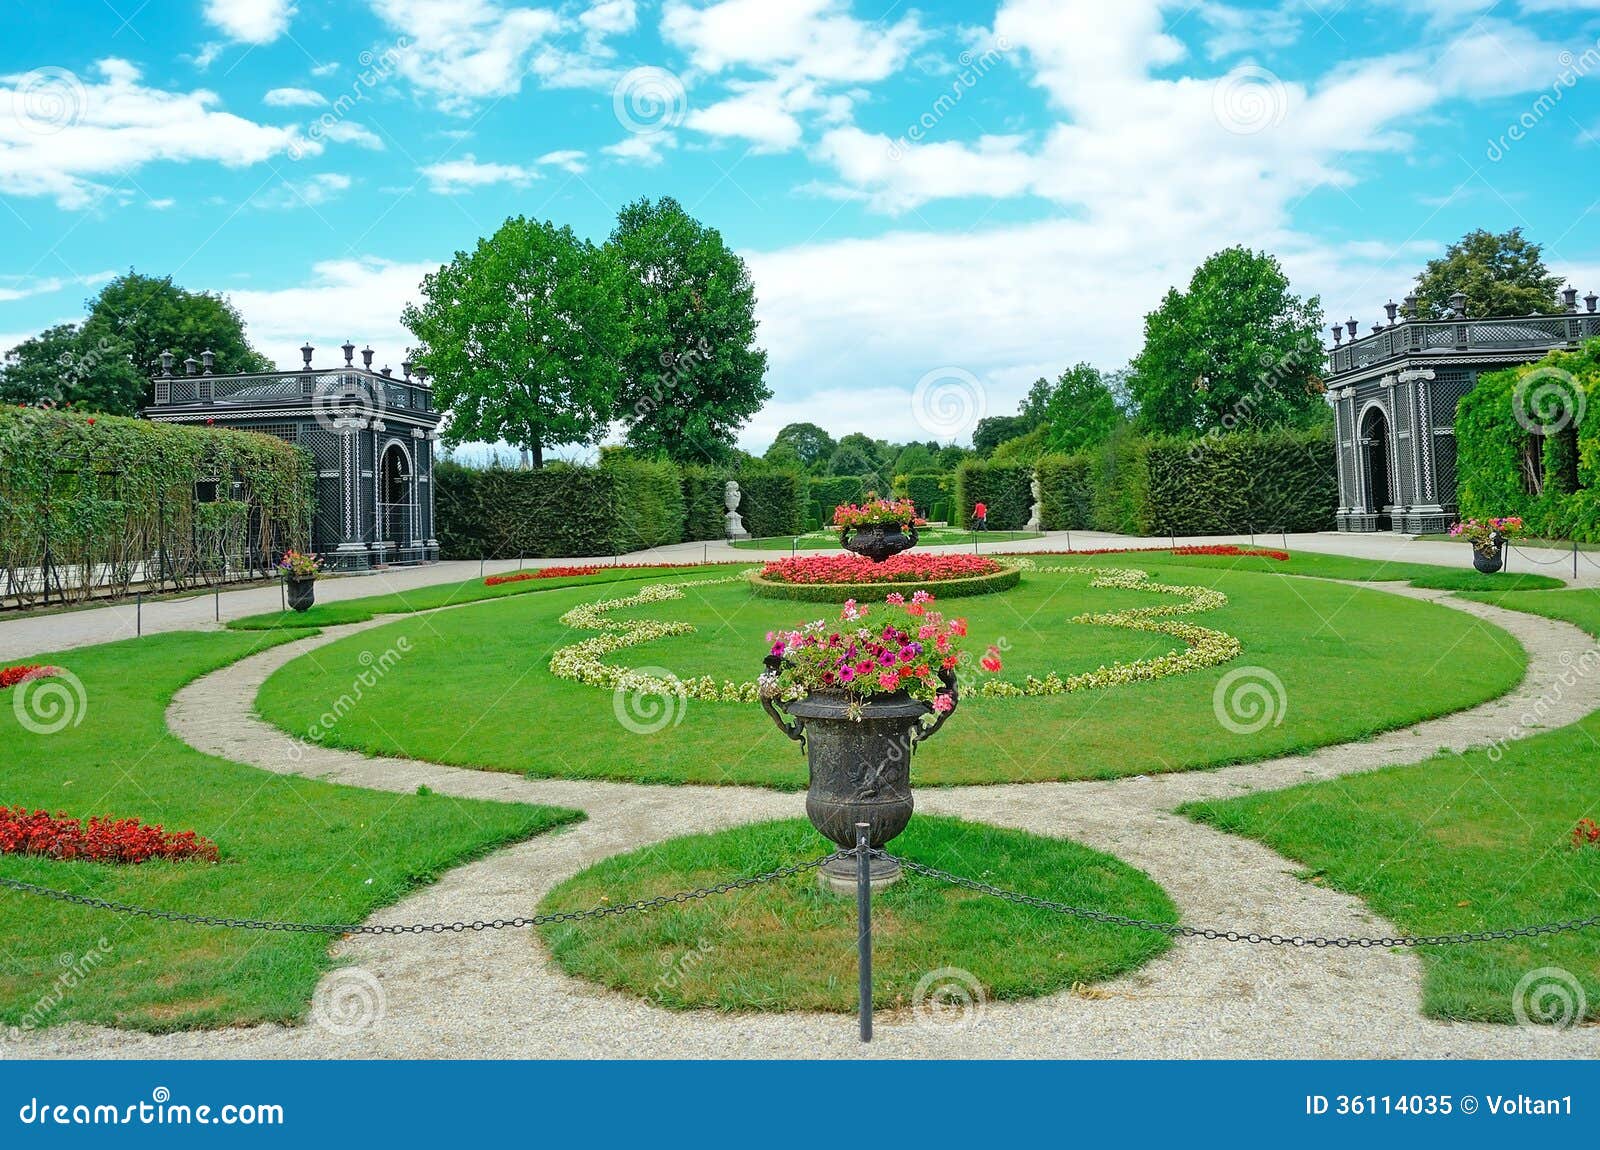 Garden of Schonbrunn Palace Editorial Image - Image of outdoor